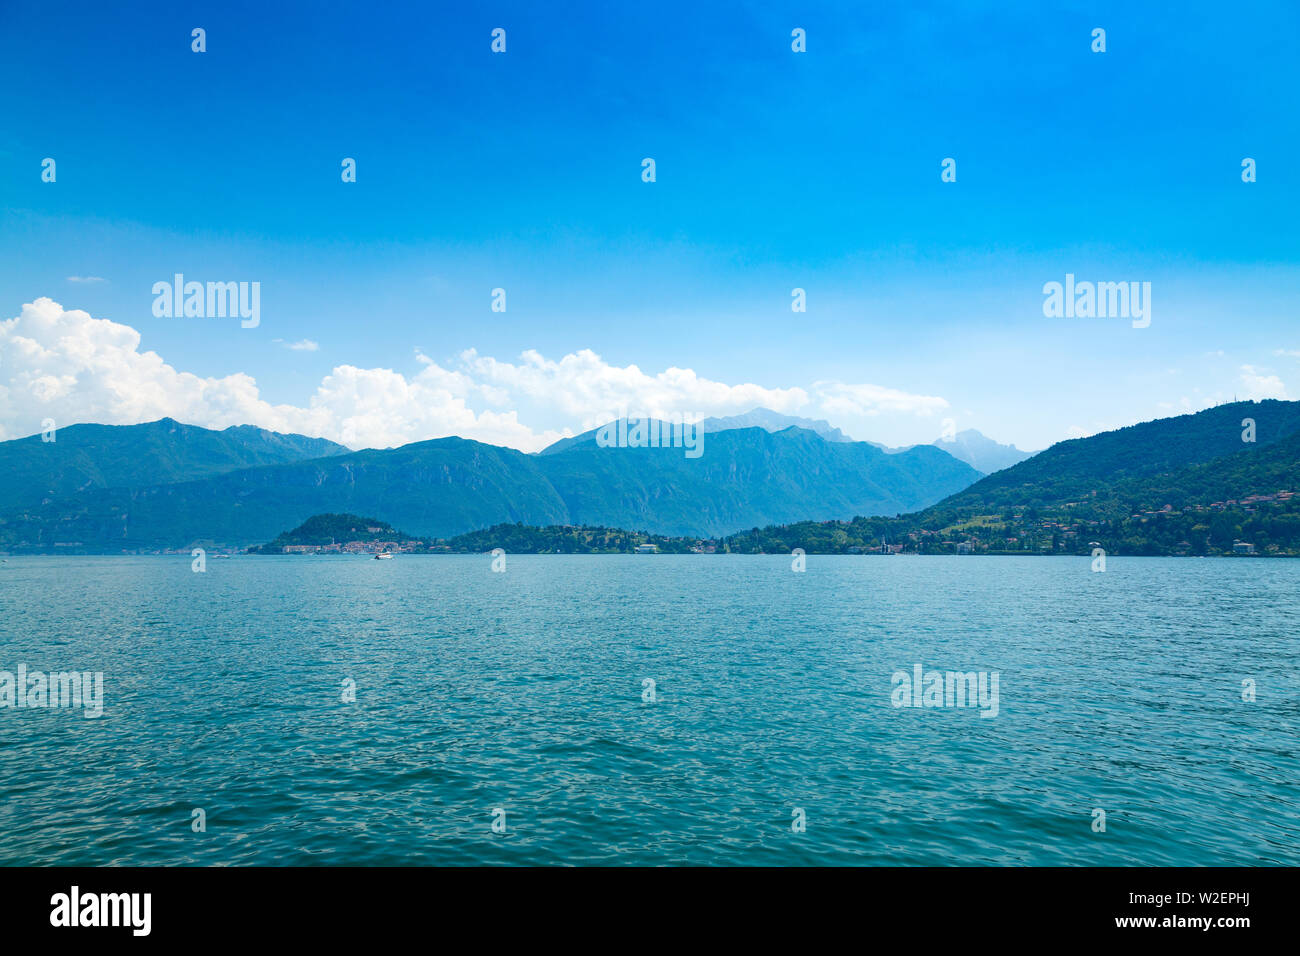 Beautiful Lake Como and Alp Monutains in Lombardy, Italy Stock Photo